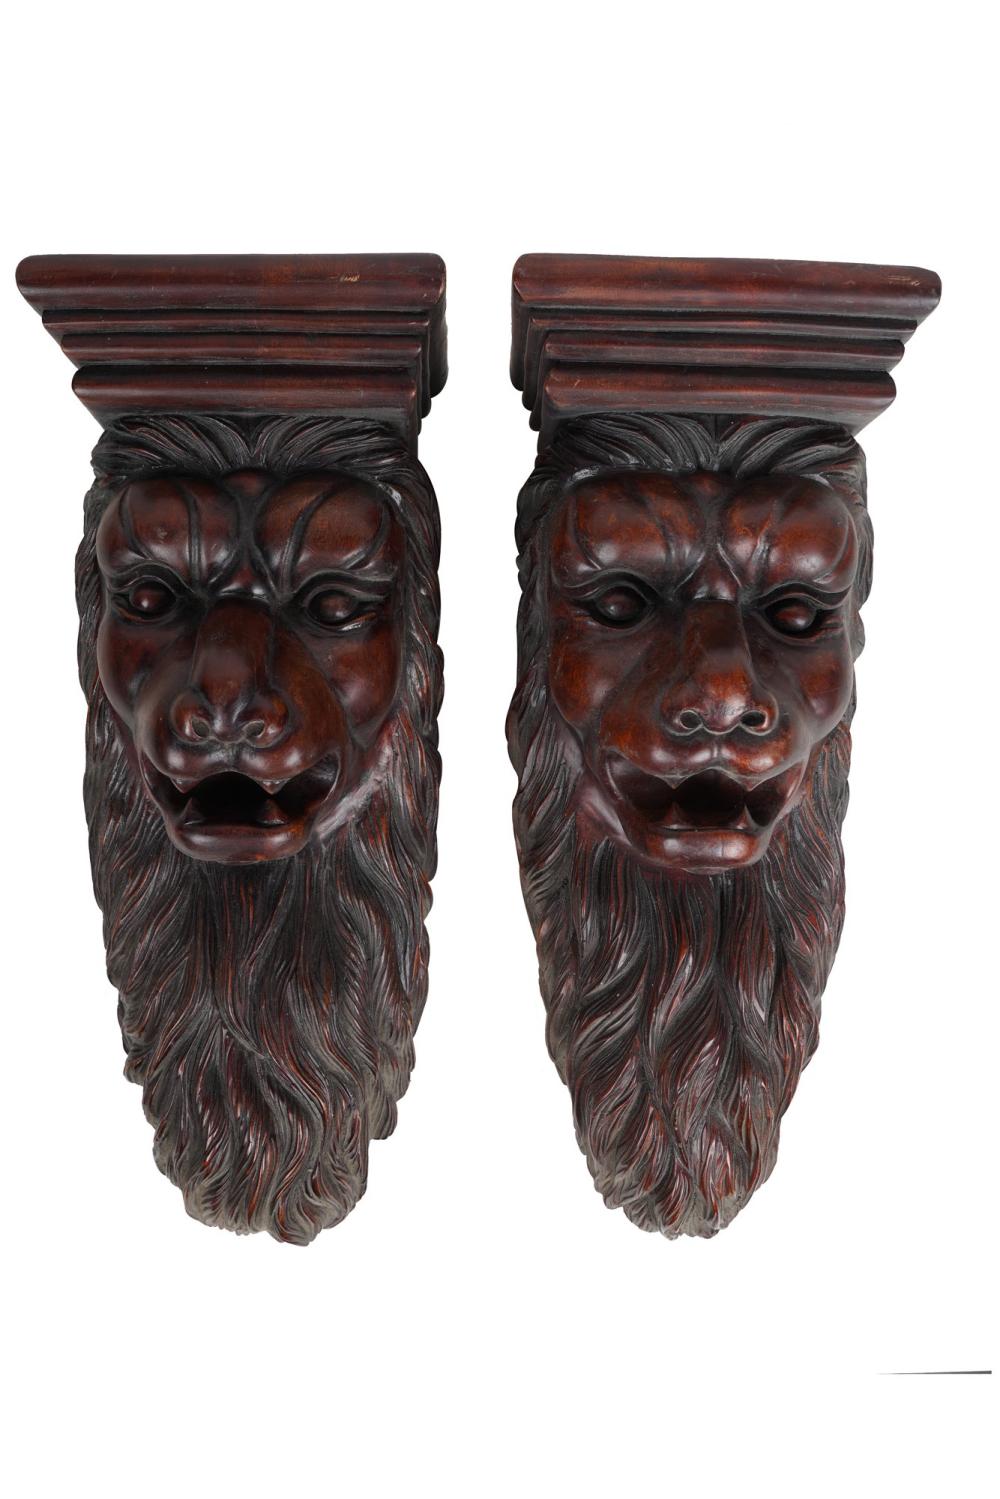 PAIR OF CARVED WOOD LION BRACKETSCondition  3360fa